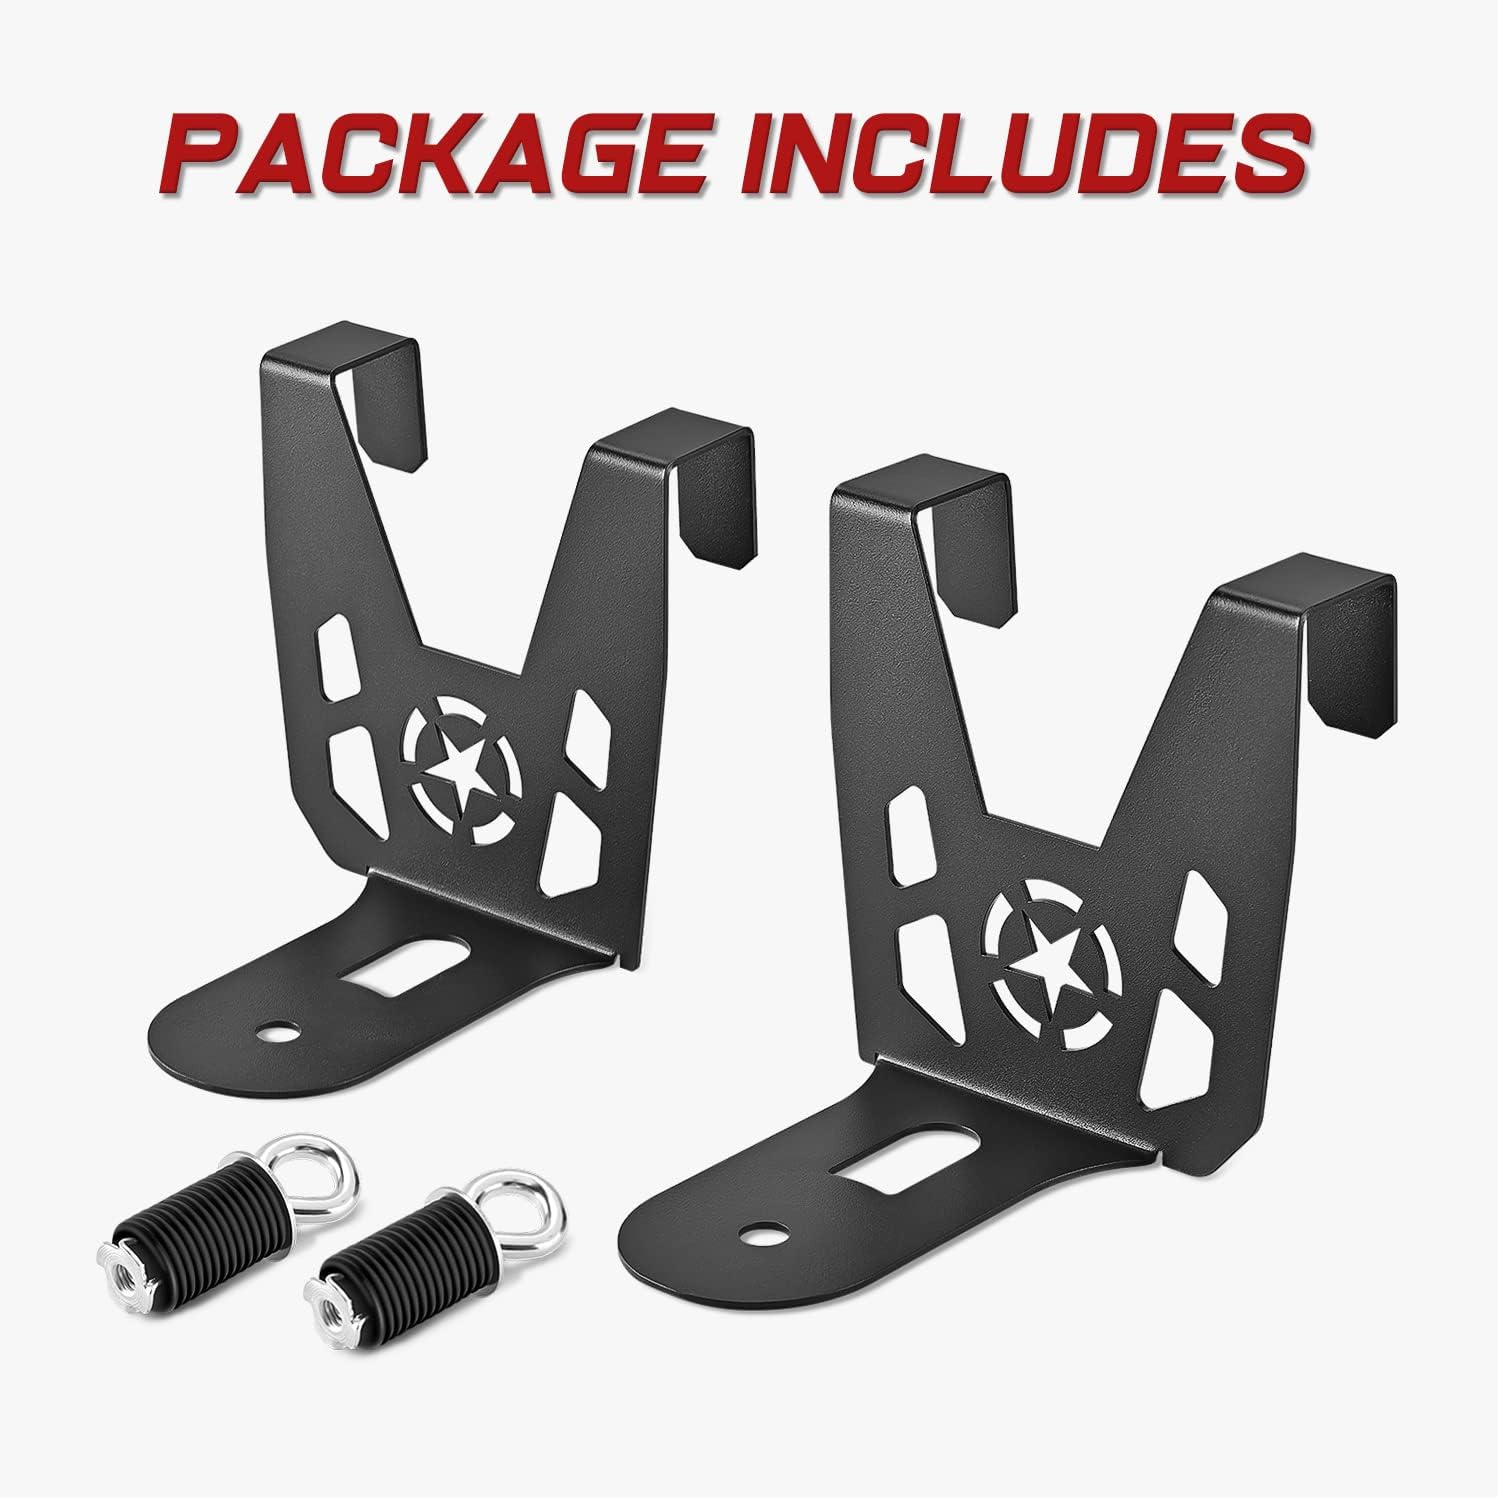 Frokom Cooler Mounting Brackets, RZR Cooler Brackets with Anchors Fit 26 Quart Cooler Compatible with Polaris RZR / XP / Turbo Pack of 2